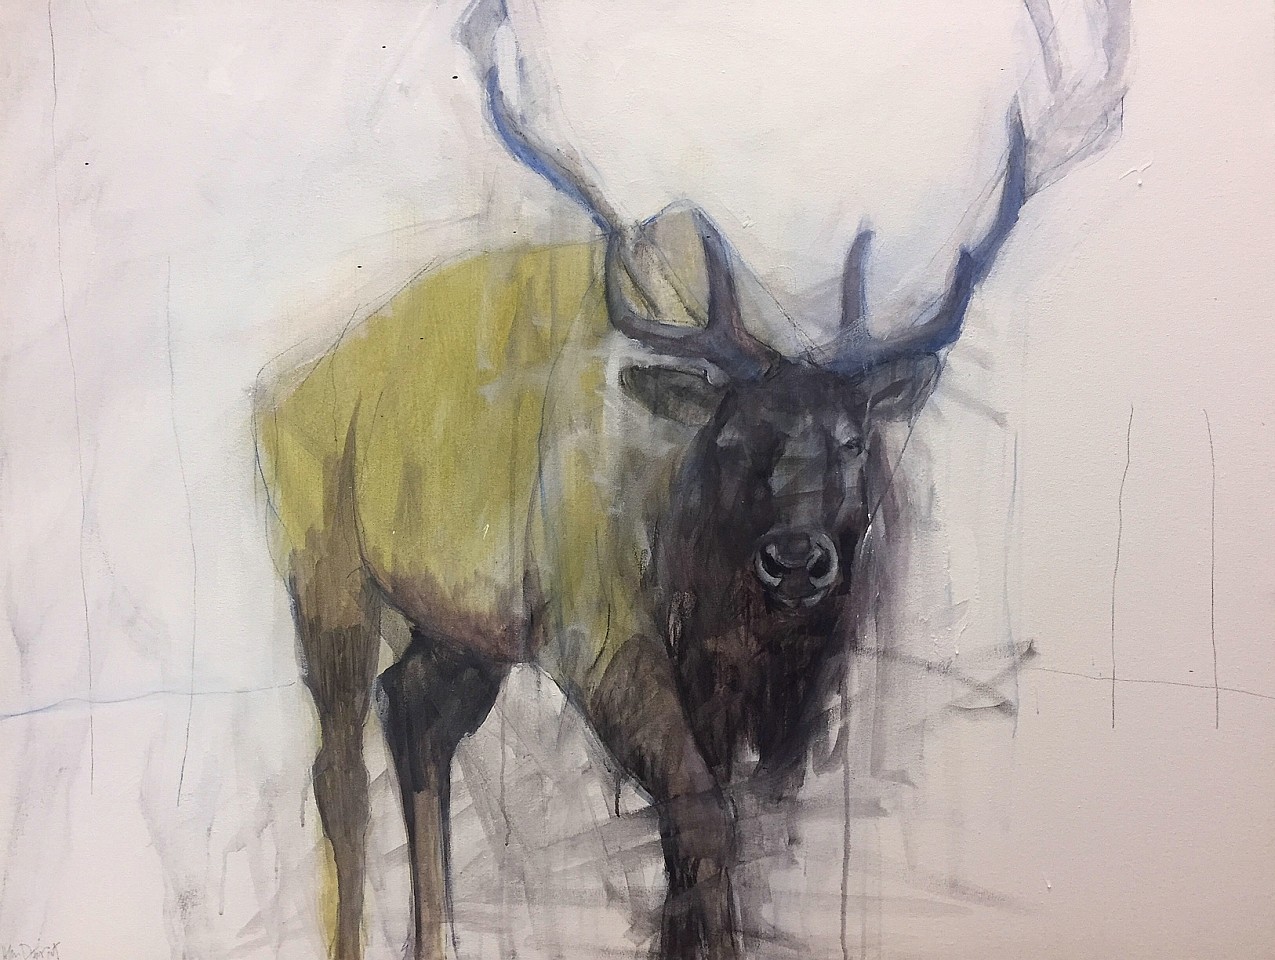 Helen Durant, Elk, 2017
Acrylic and Charcoal on Canvas, 36 x 48 in.
SOLD
&bull;